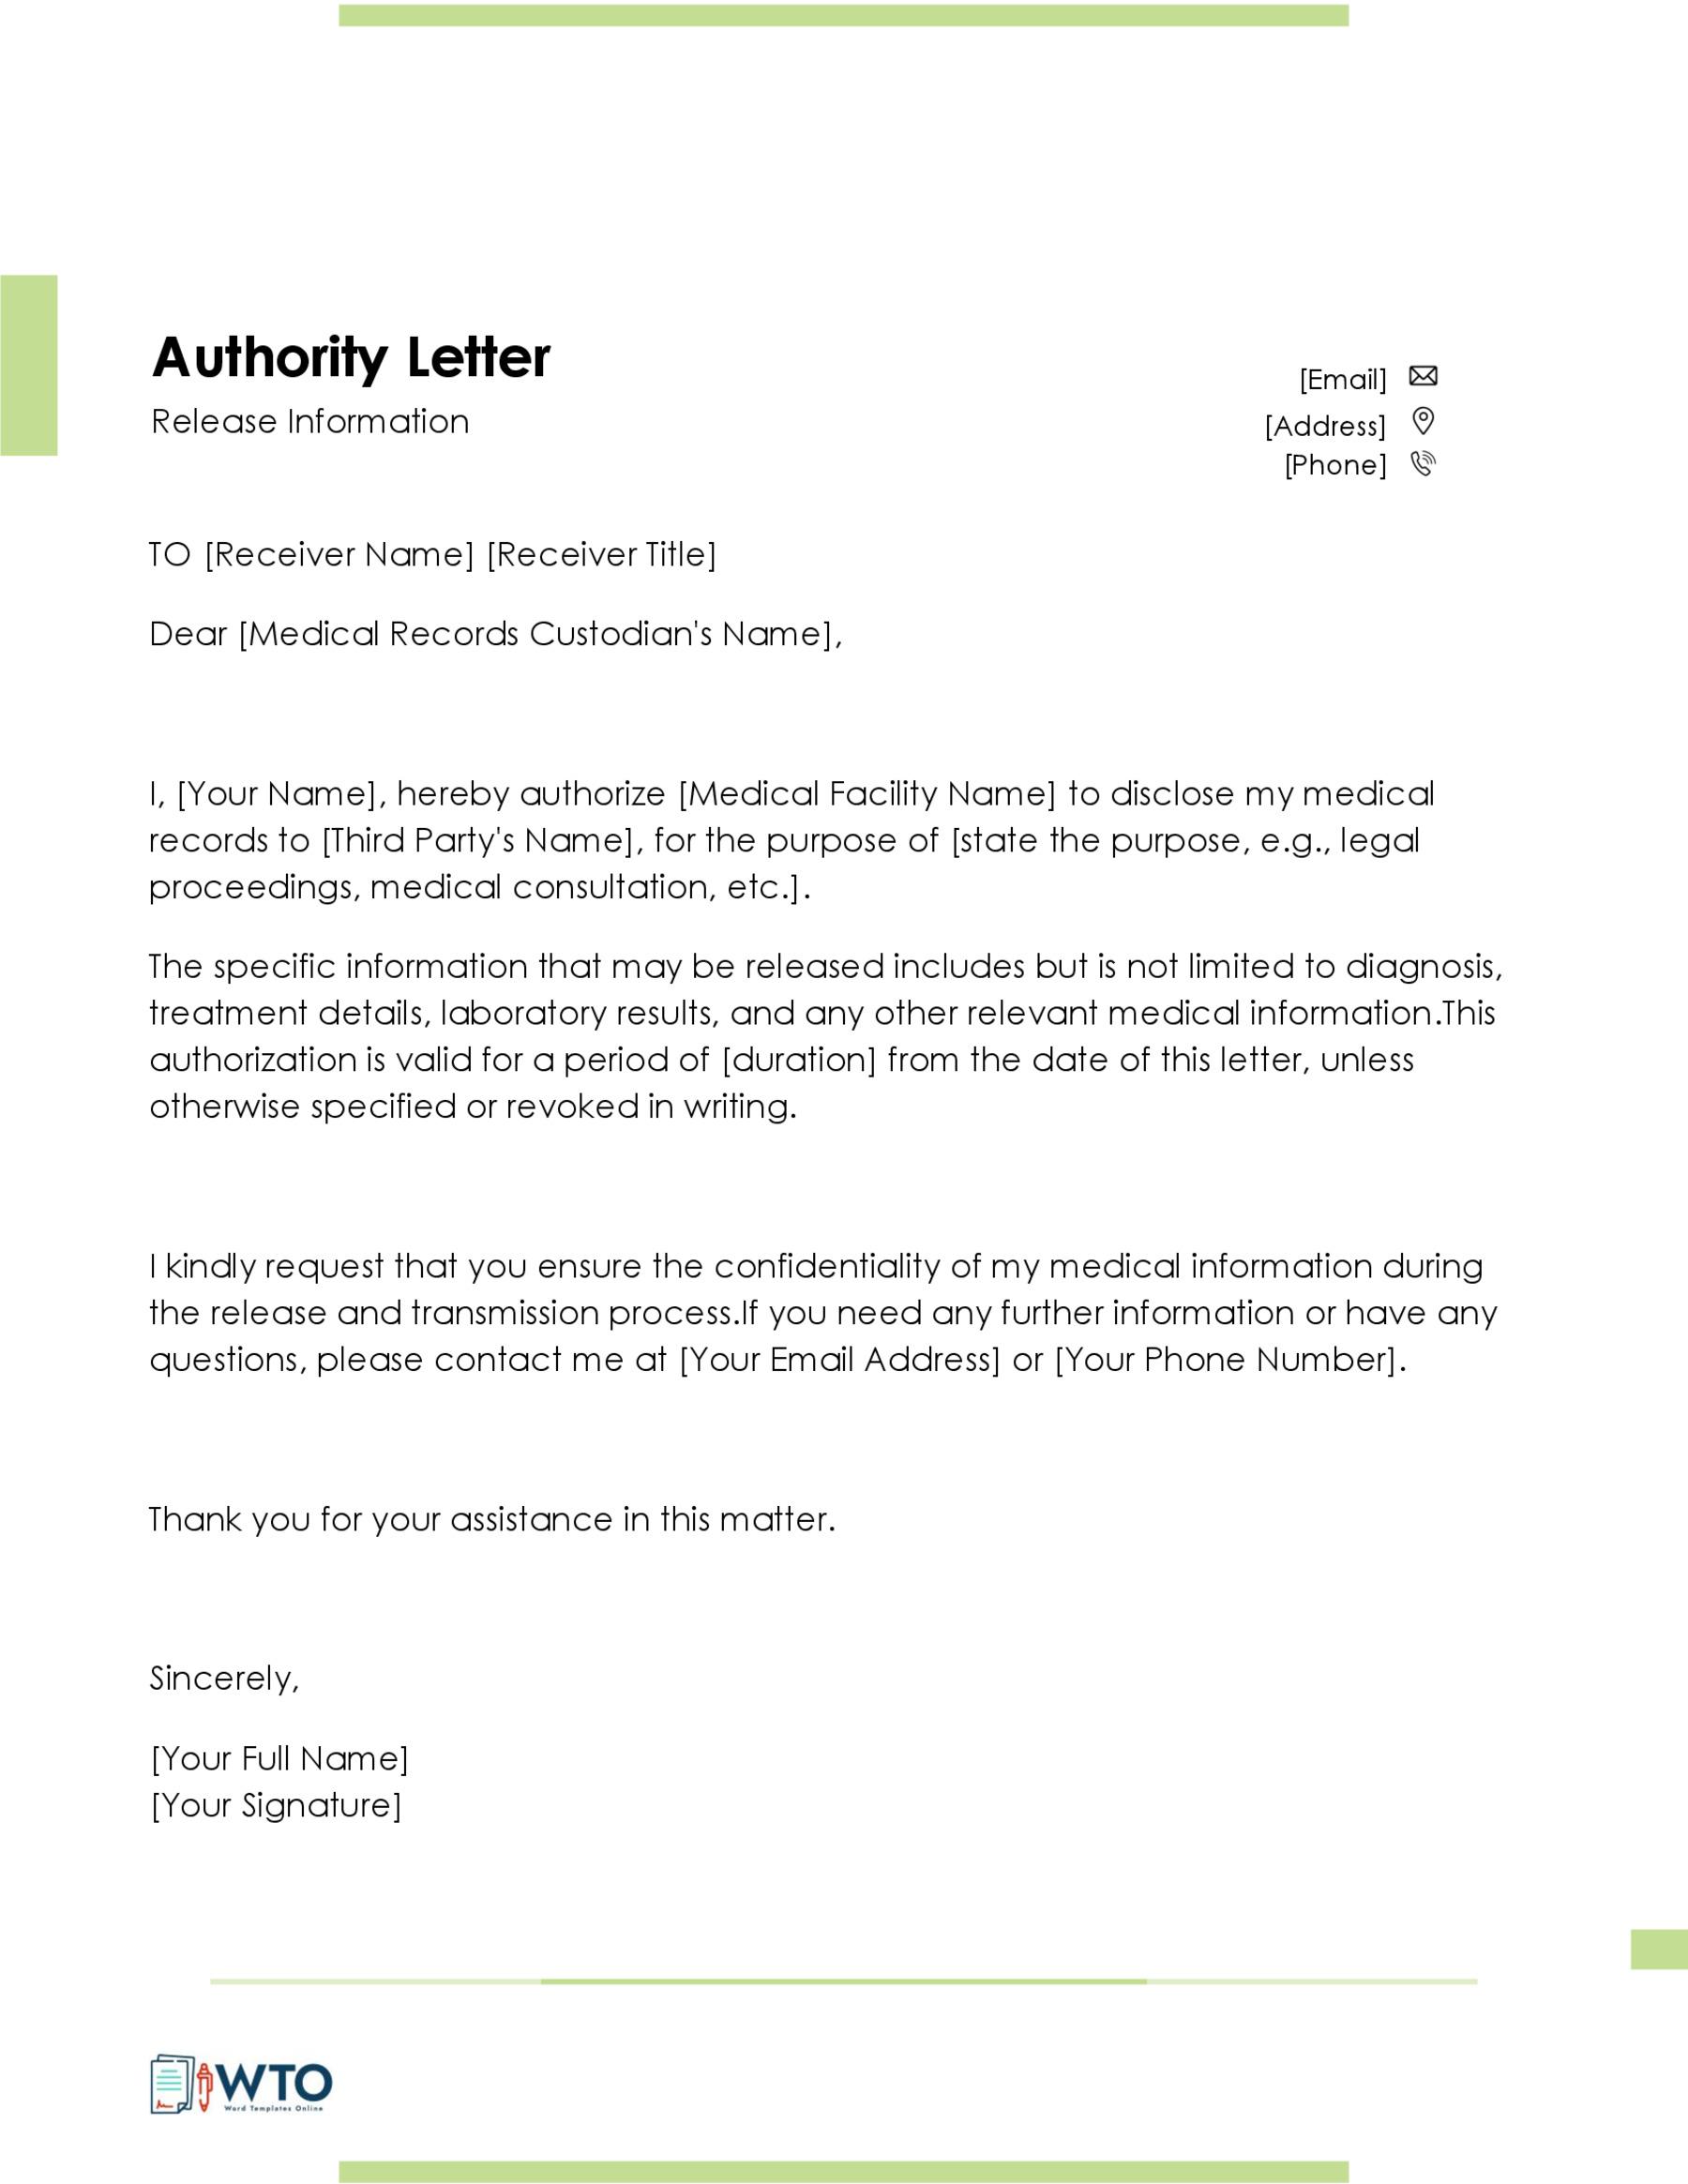 Authorization Letter to Release Information Template-Ms word Format